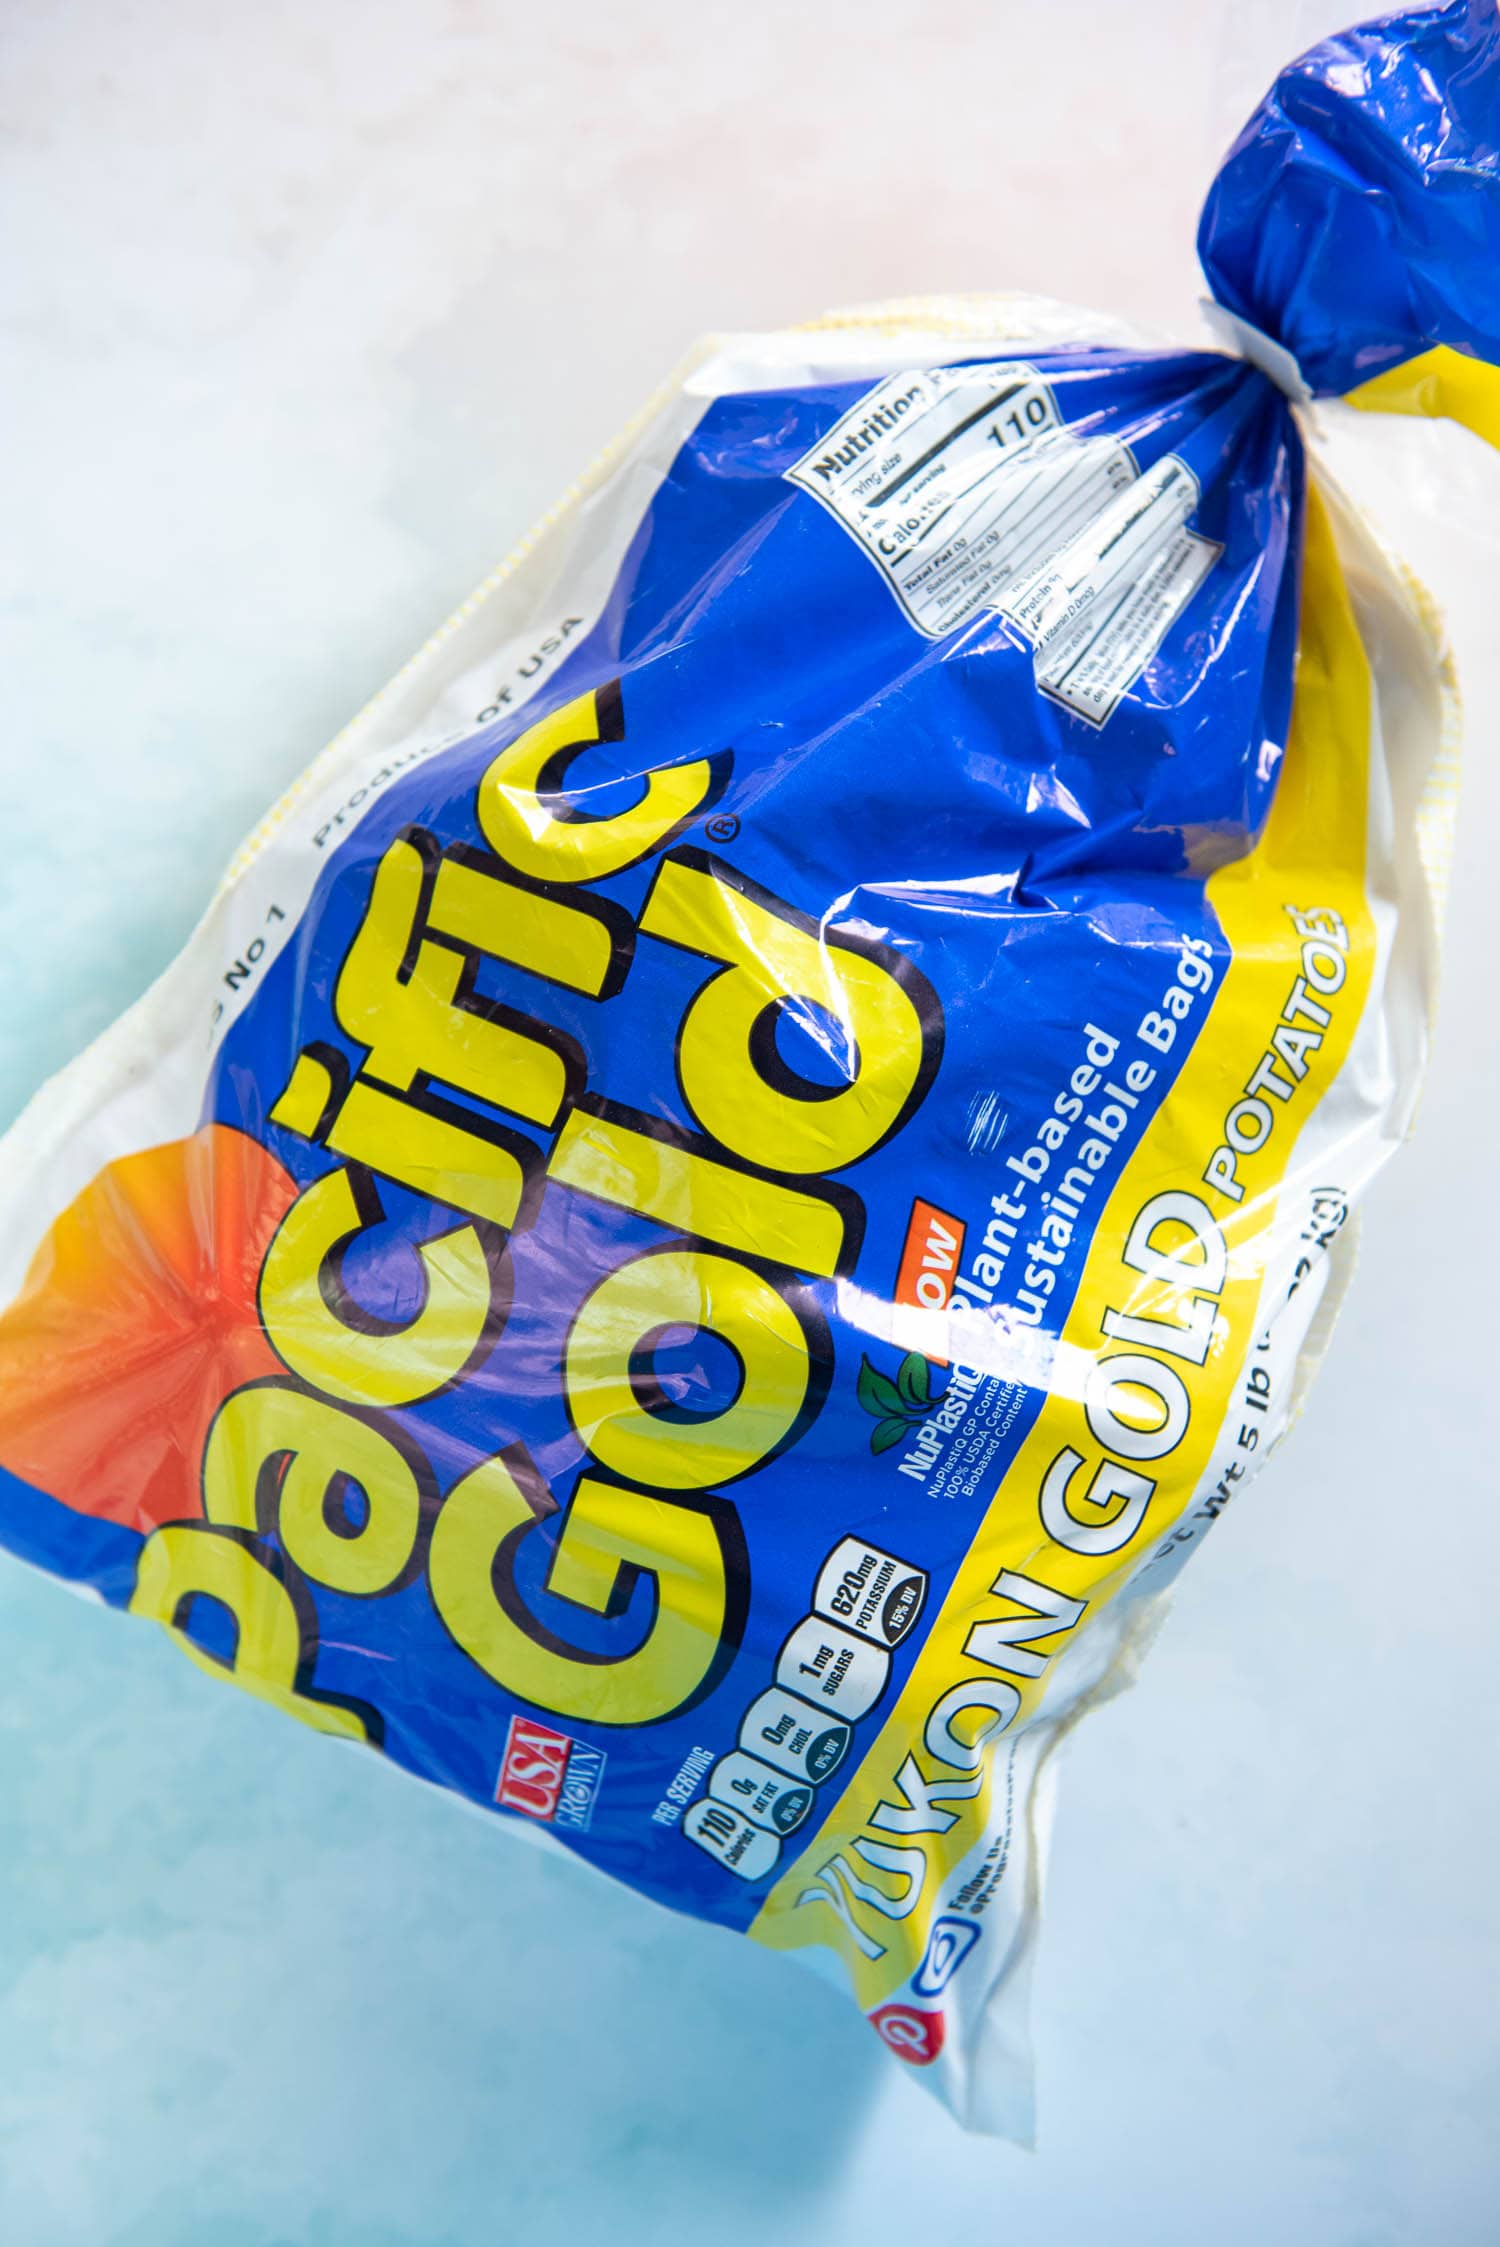 5lb bag of pacific gold yukon gold potatoes on blue surface